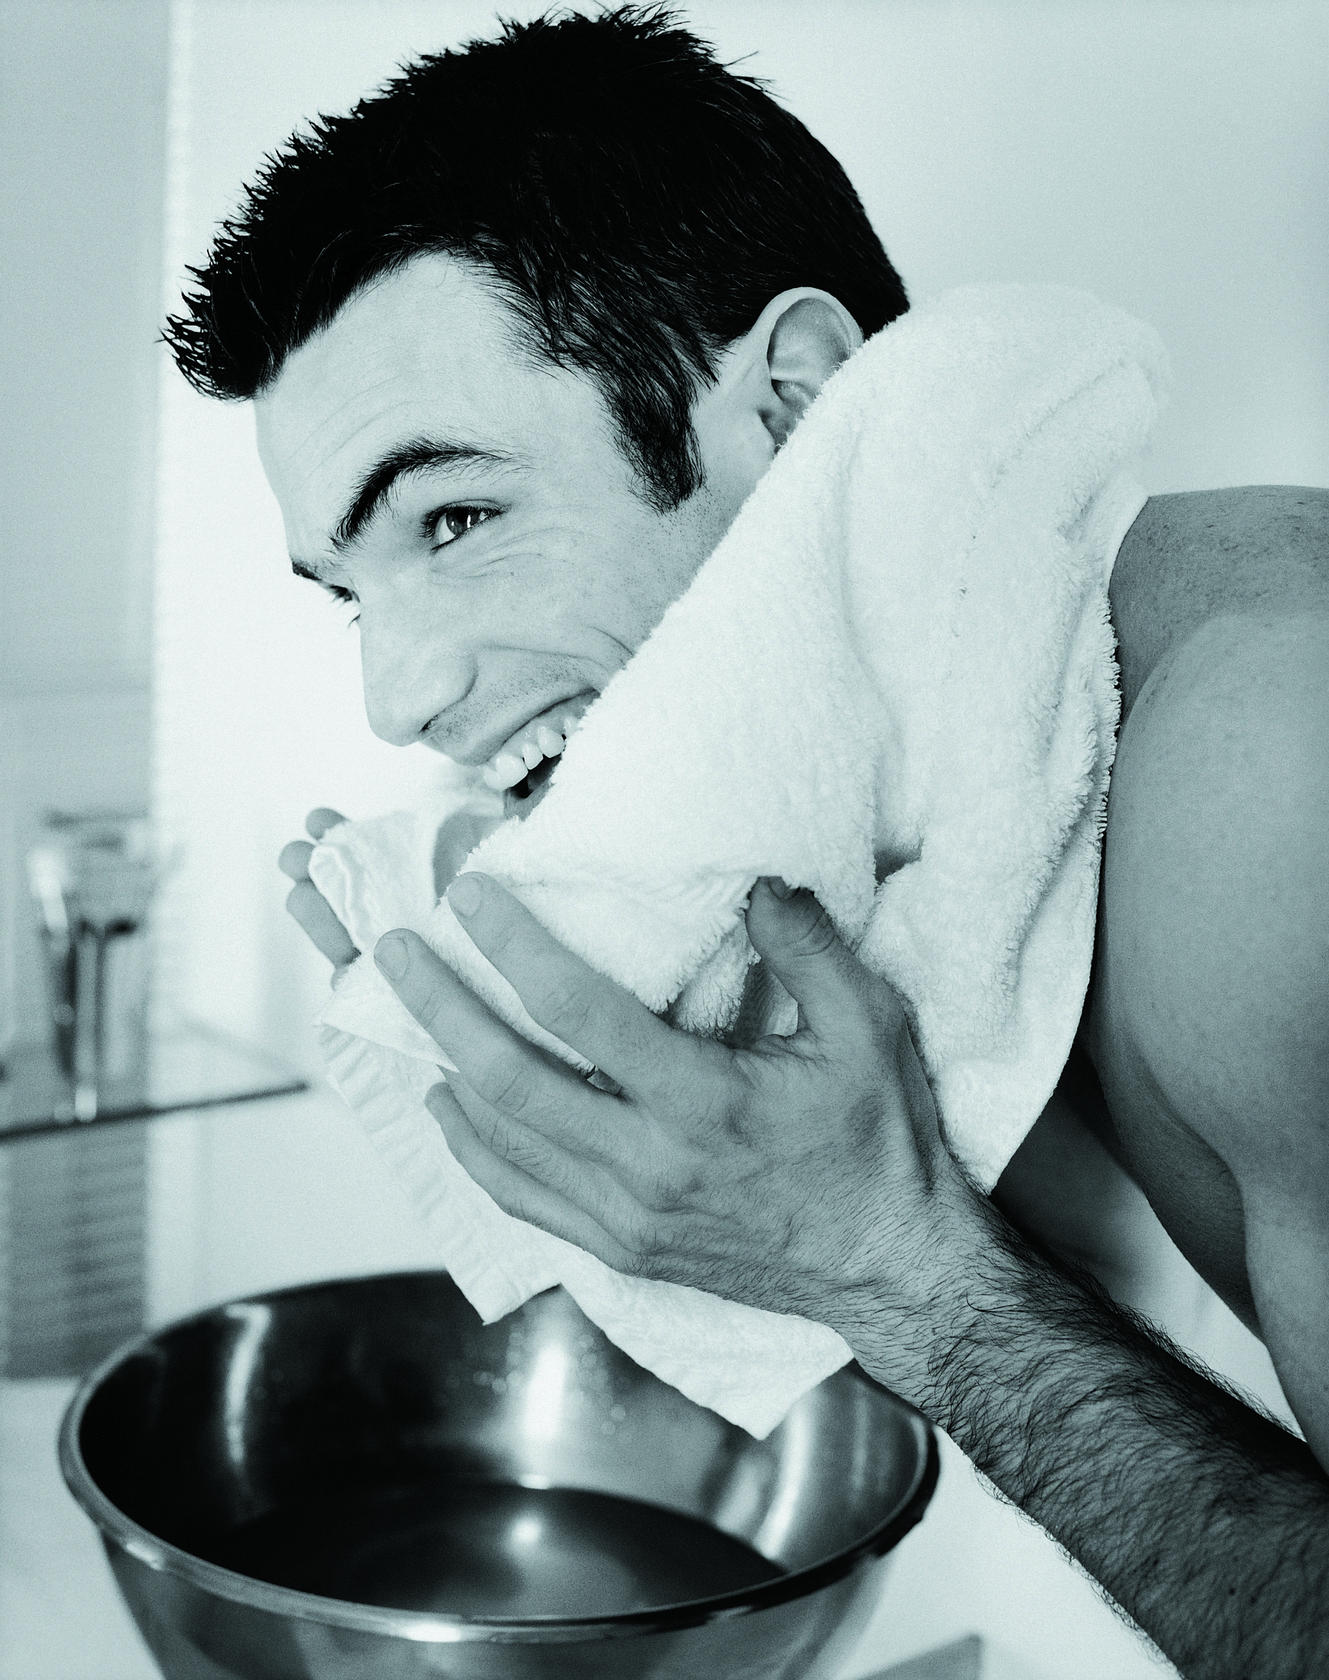 All men need grooming at some point in their lives. Photos: Thinkstock